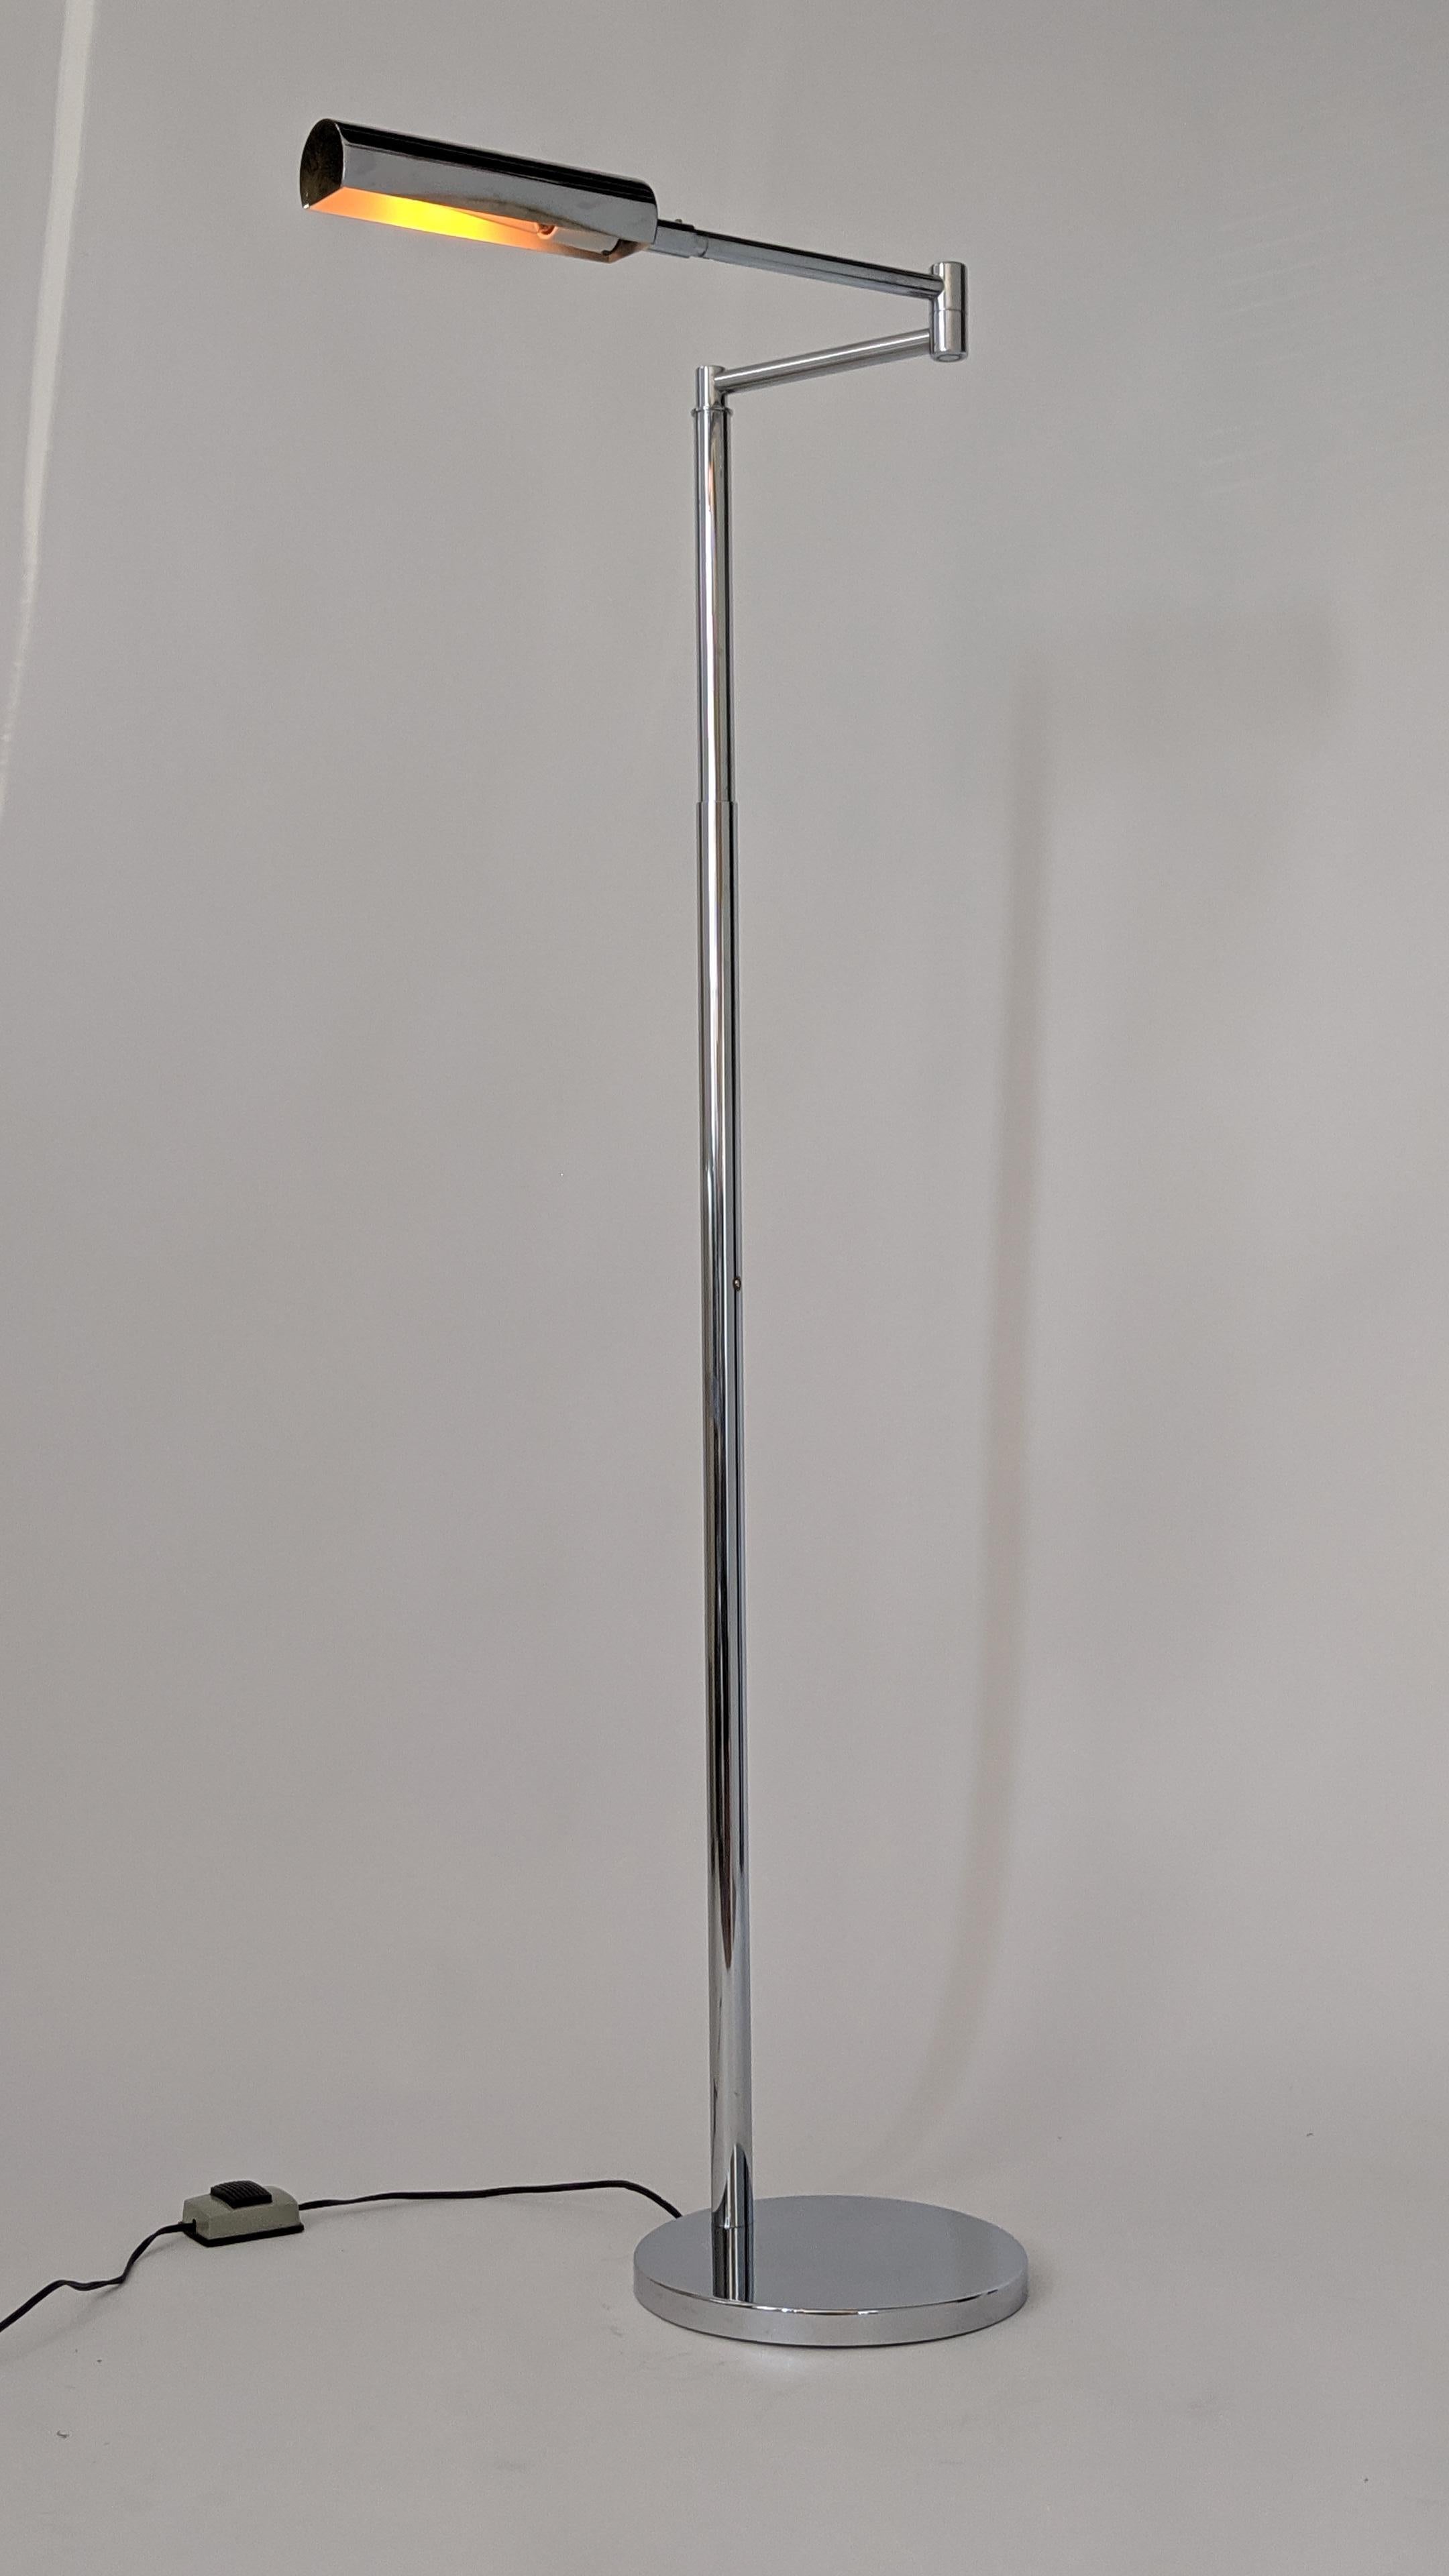 Minimalist modern telescopic swing arm reading floor lamp from Koch & Lowy 

Well made construction with prime quality material. 

Slide up and down from 42 to 52 inches. 

All hinges and sliding mechanism are tight, strurdy and easy to move